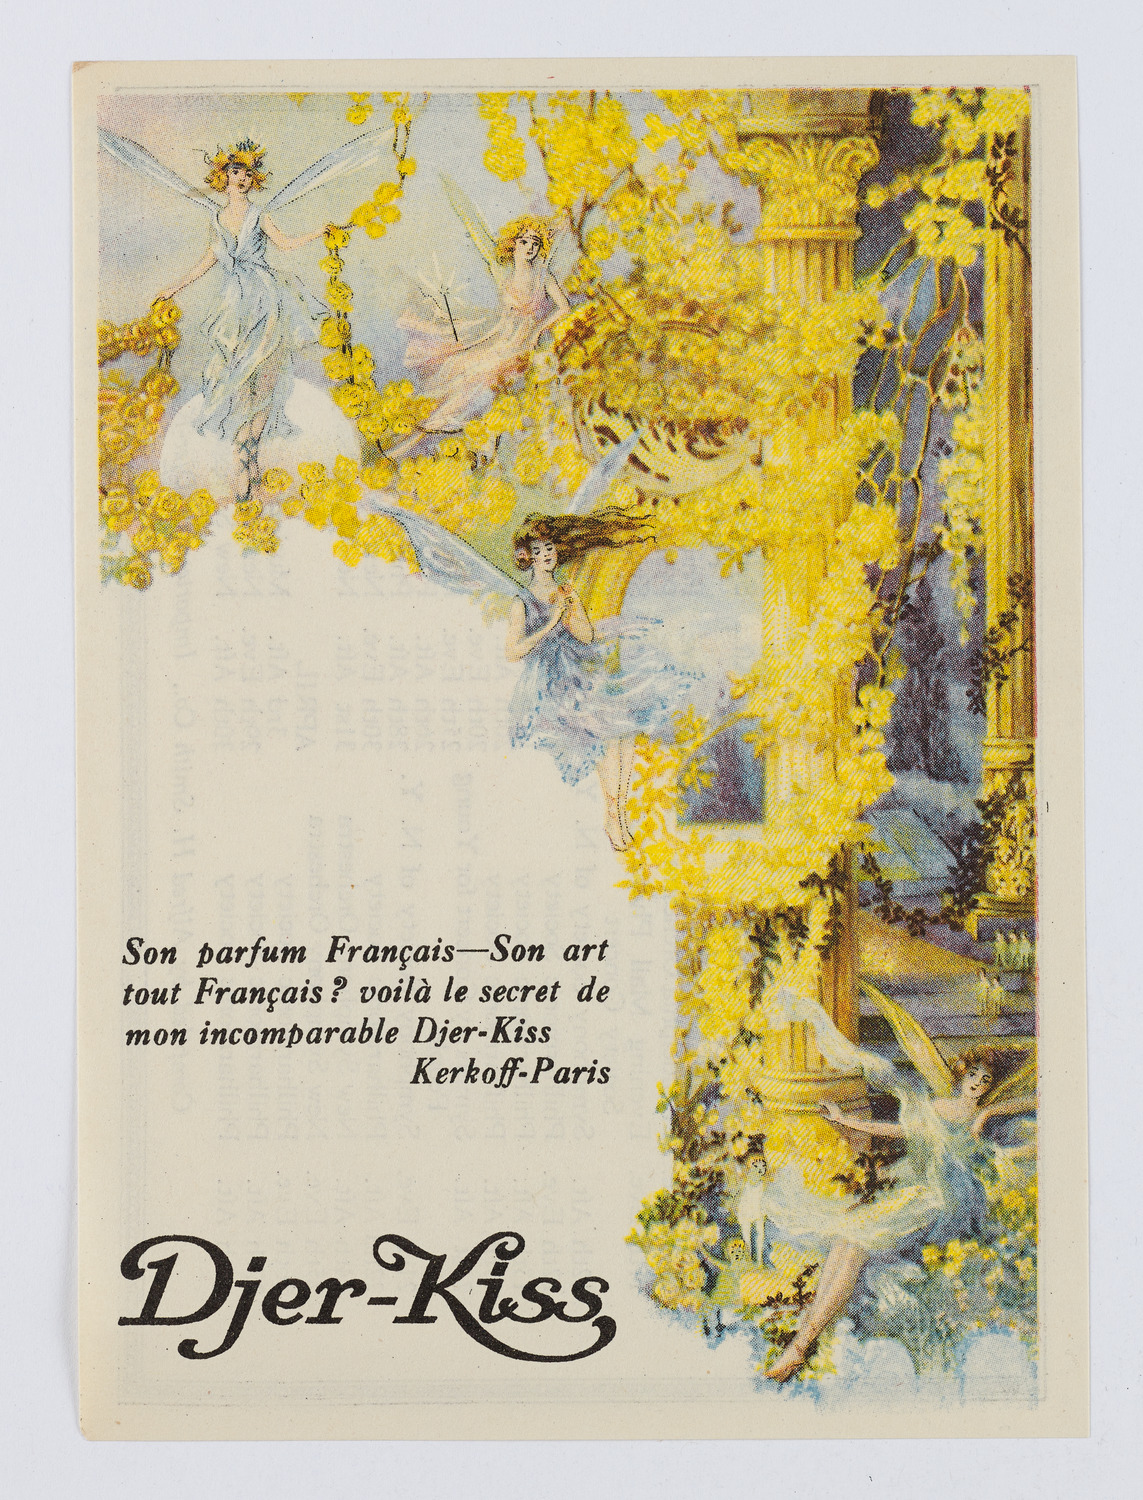 Djer-Kiss Cosmetics Orchestral Concert Schedules, 1920